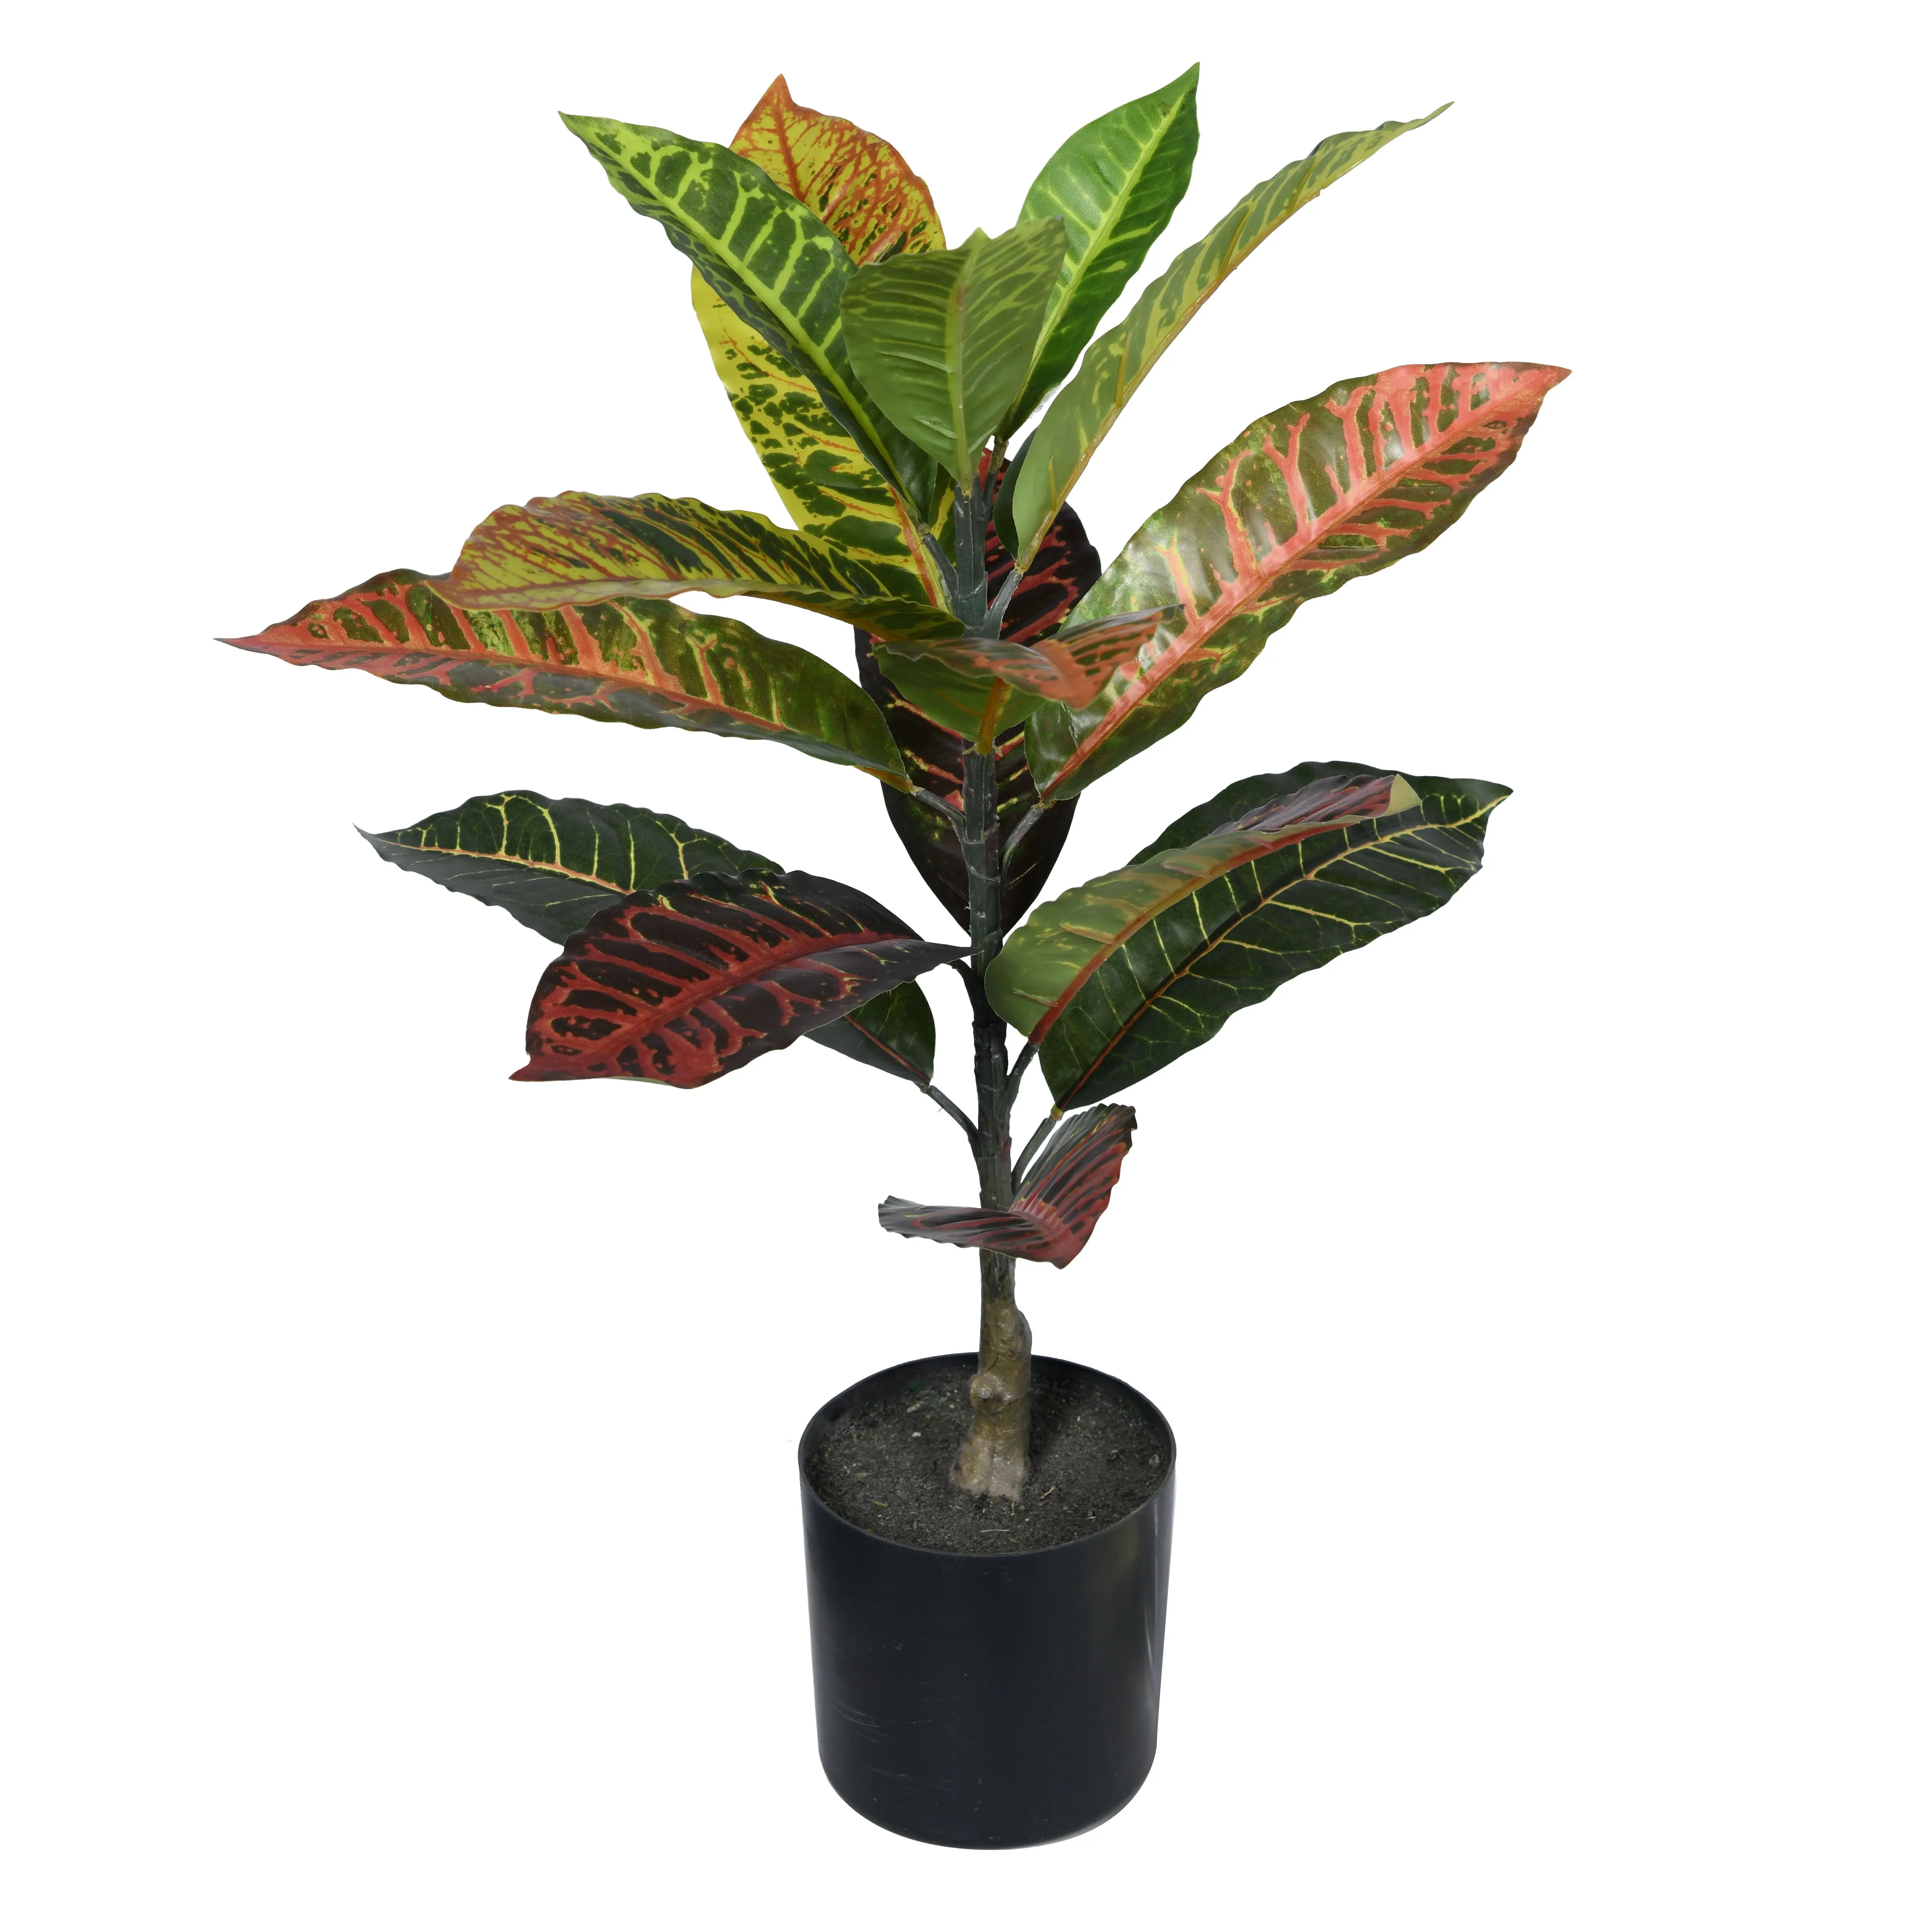 Best sale faux Potted Plant Colorful Silk Tree Warehouse Artificial Croton Palm Tree Bush for home decor